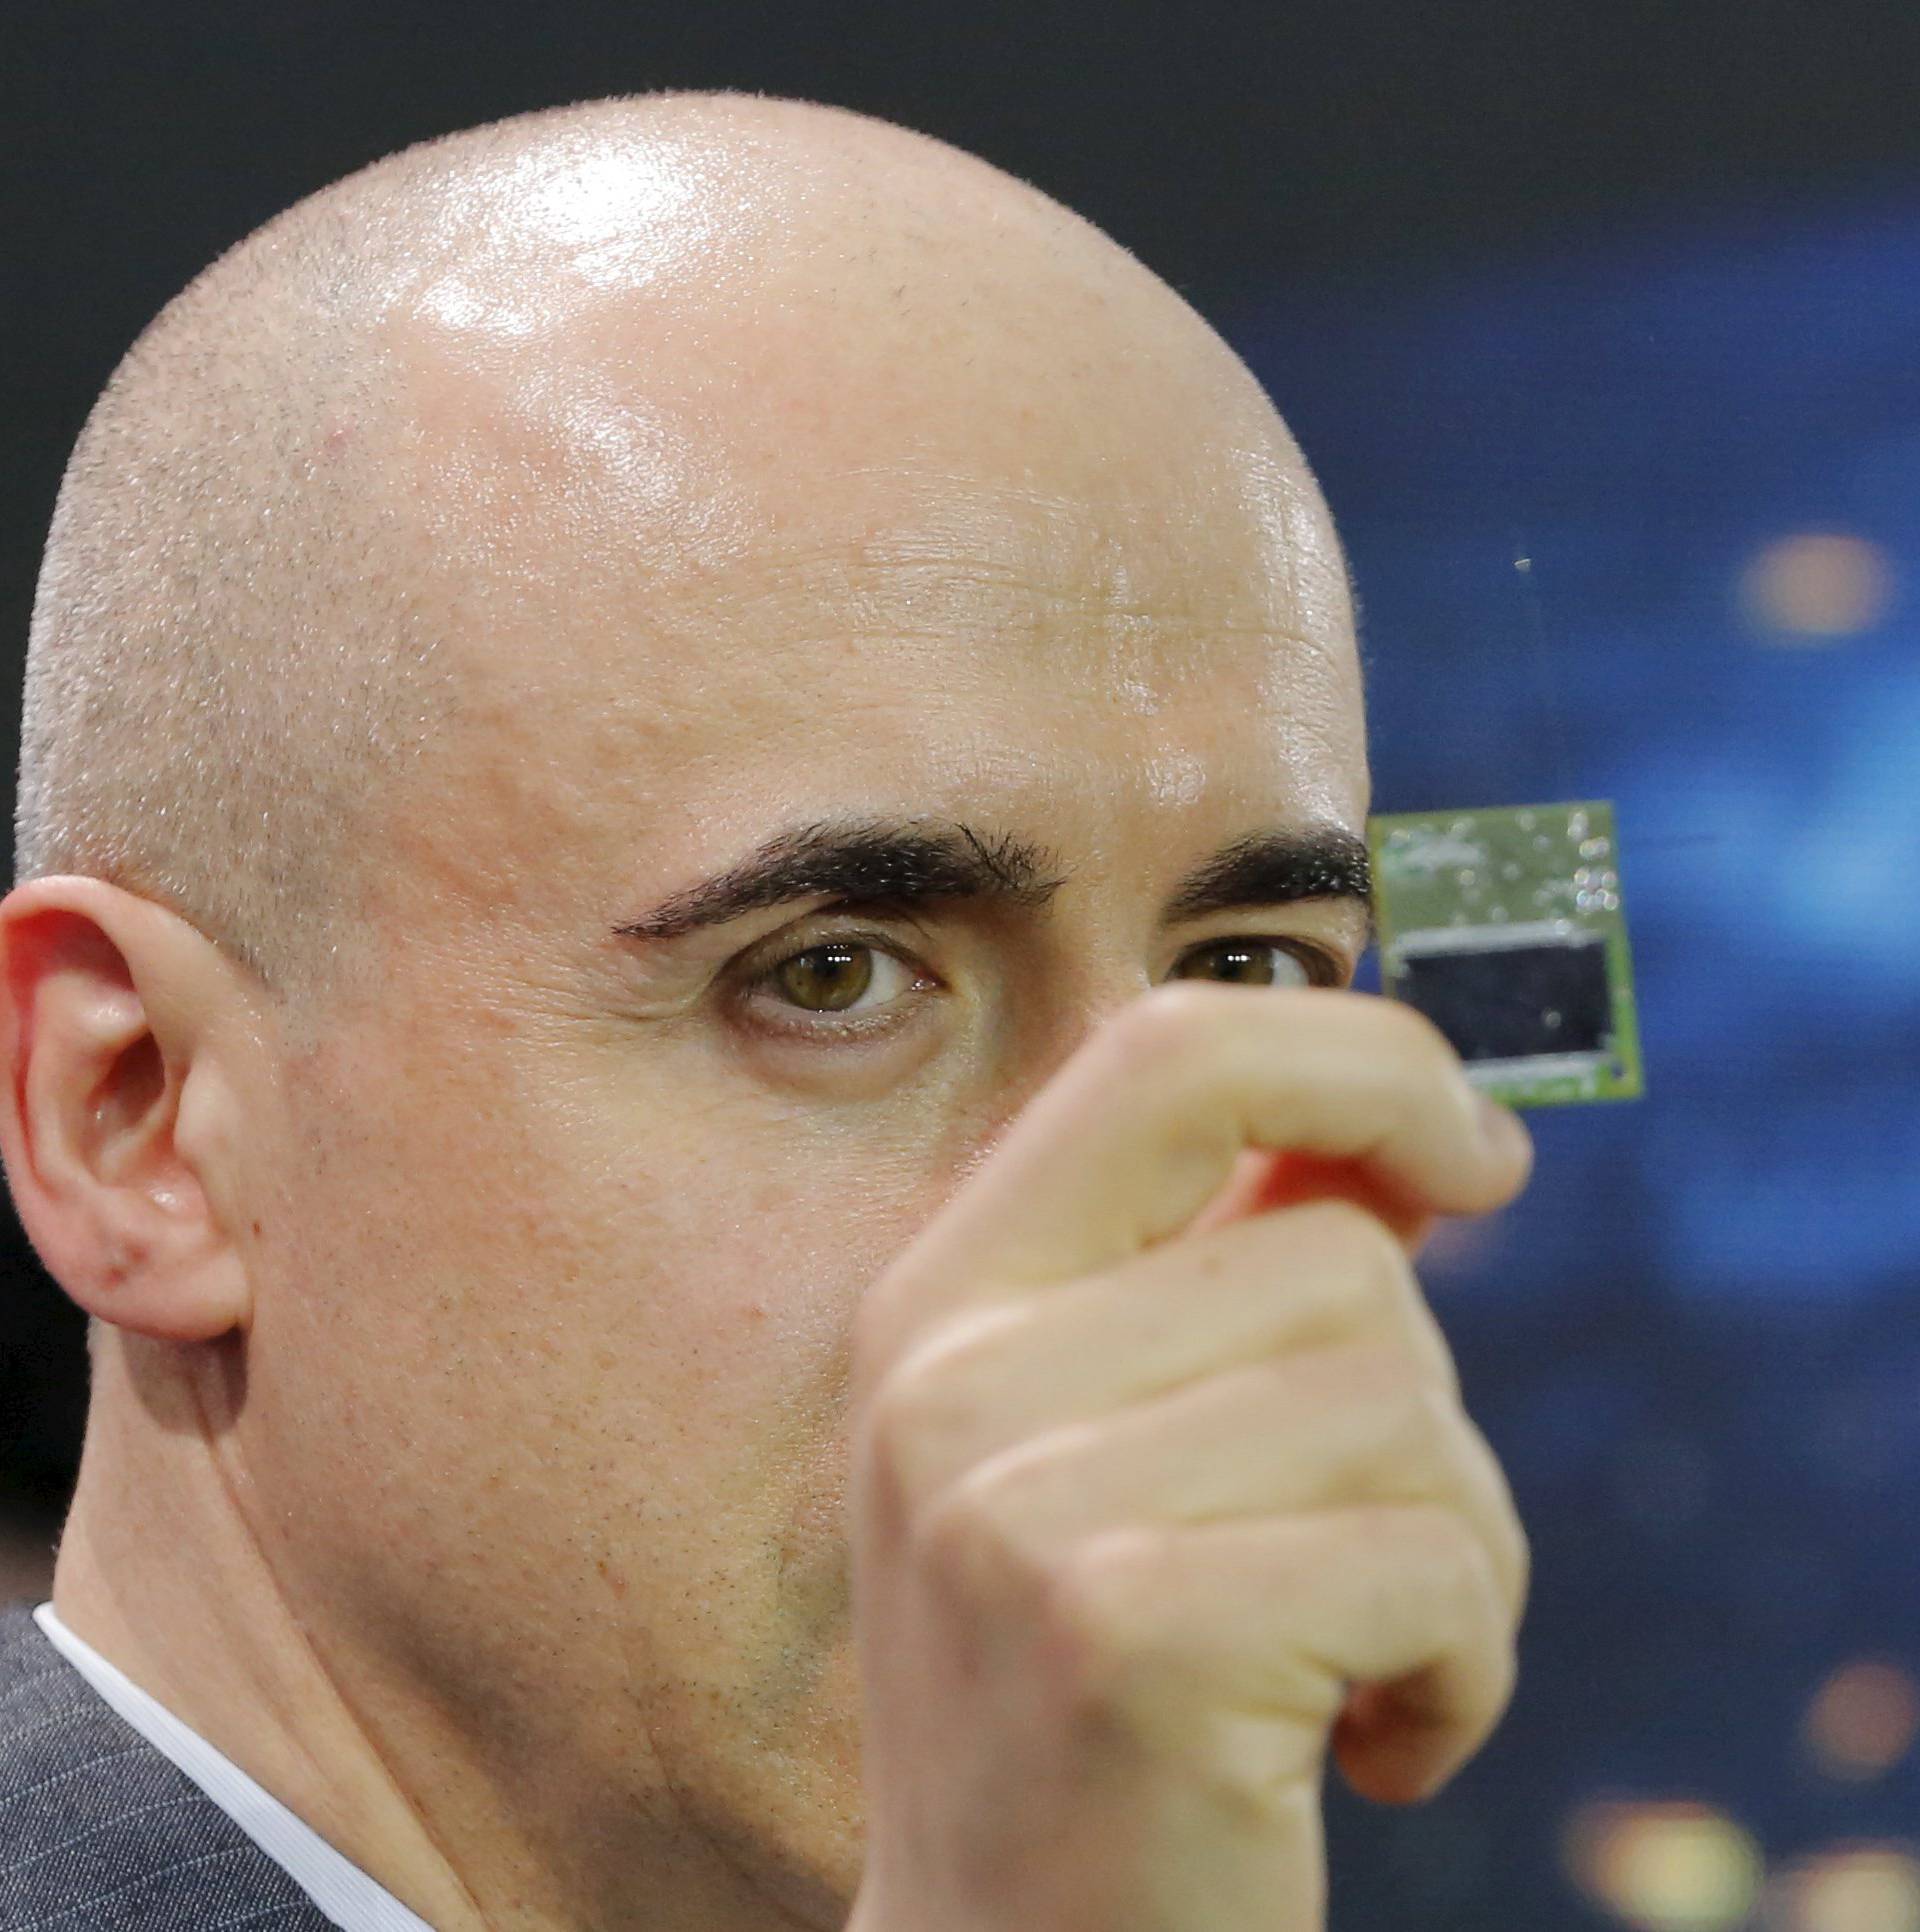 Investor Yuri Milner holds a small chip during an announcement of the Breakthrough Starshot initiative with physicist Stephen Hawking in New York